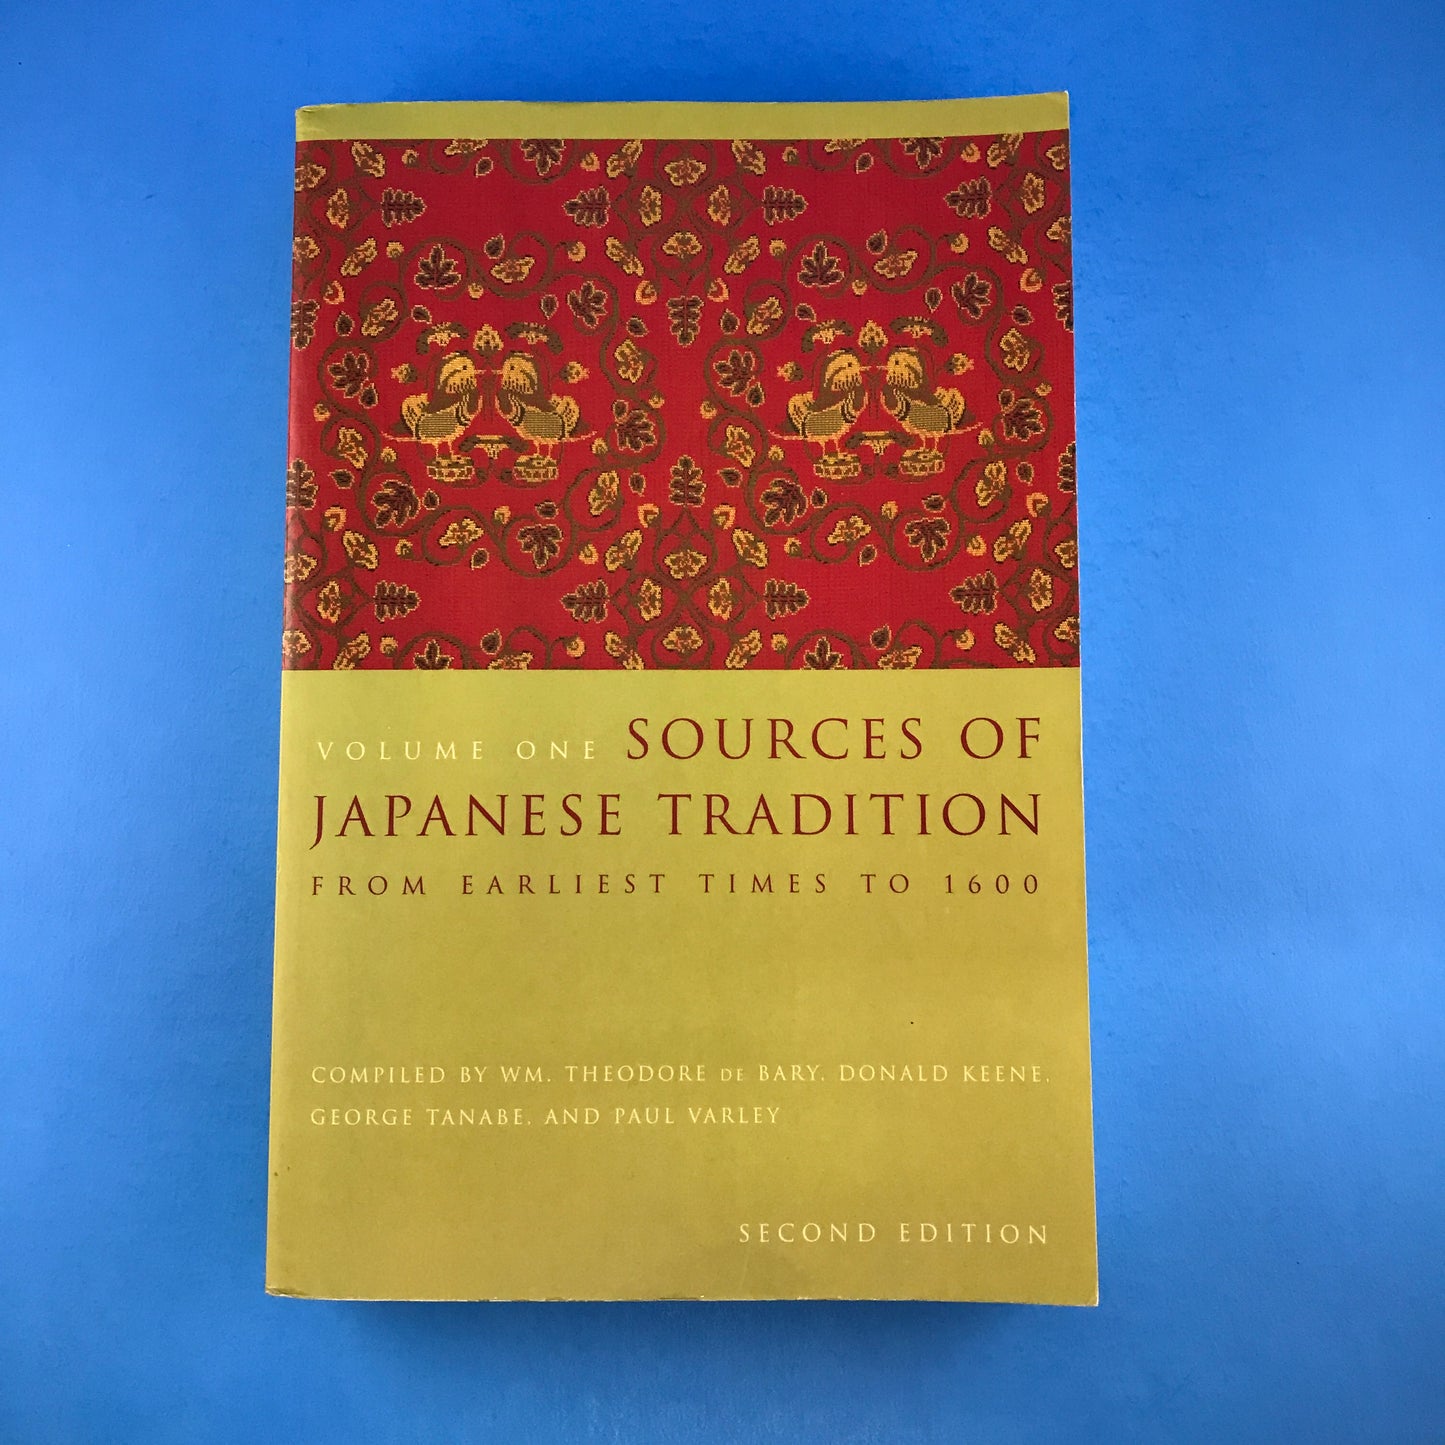 Sources of Japanese Tradition (Volume 1)